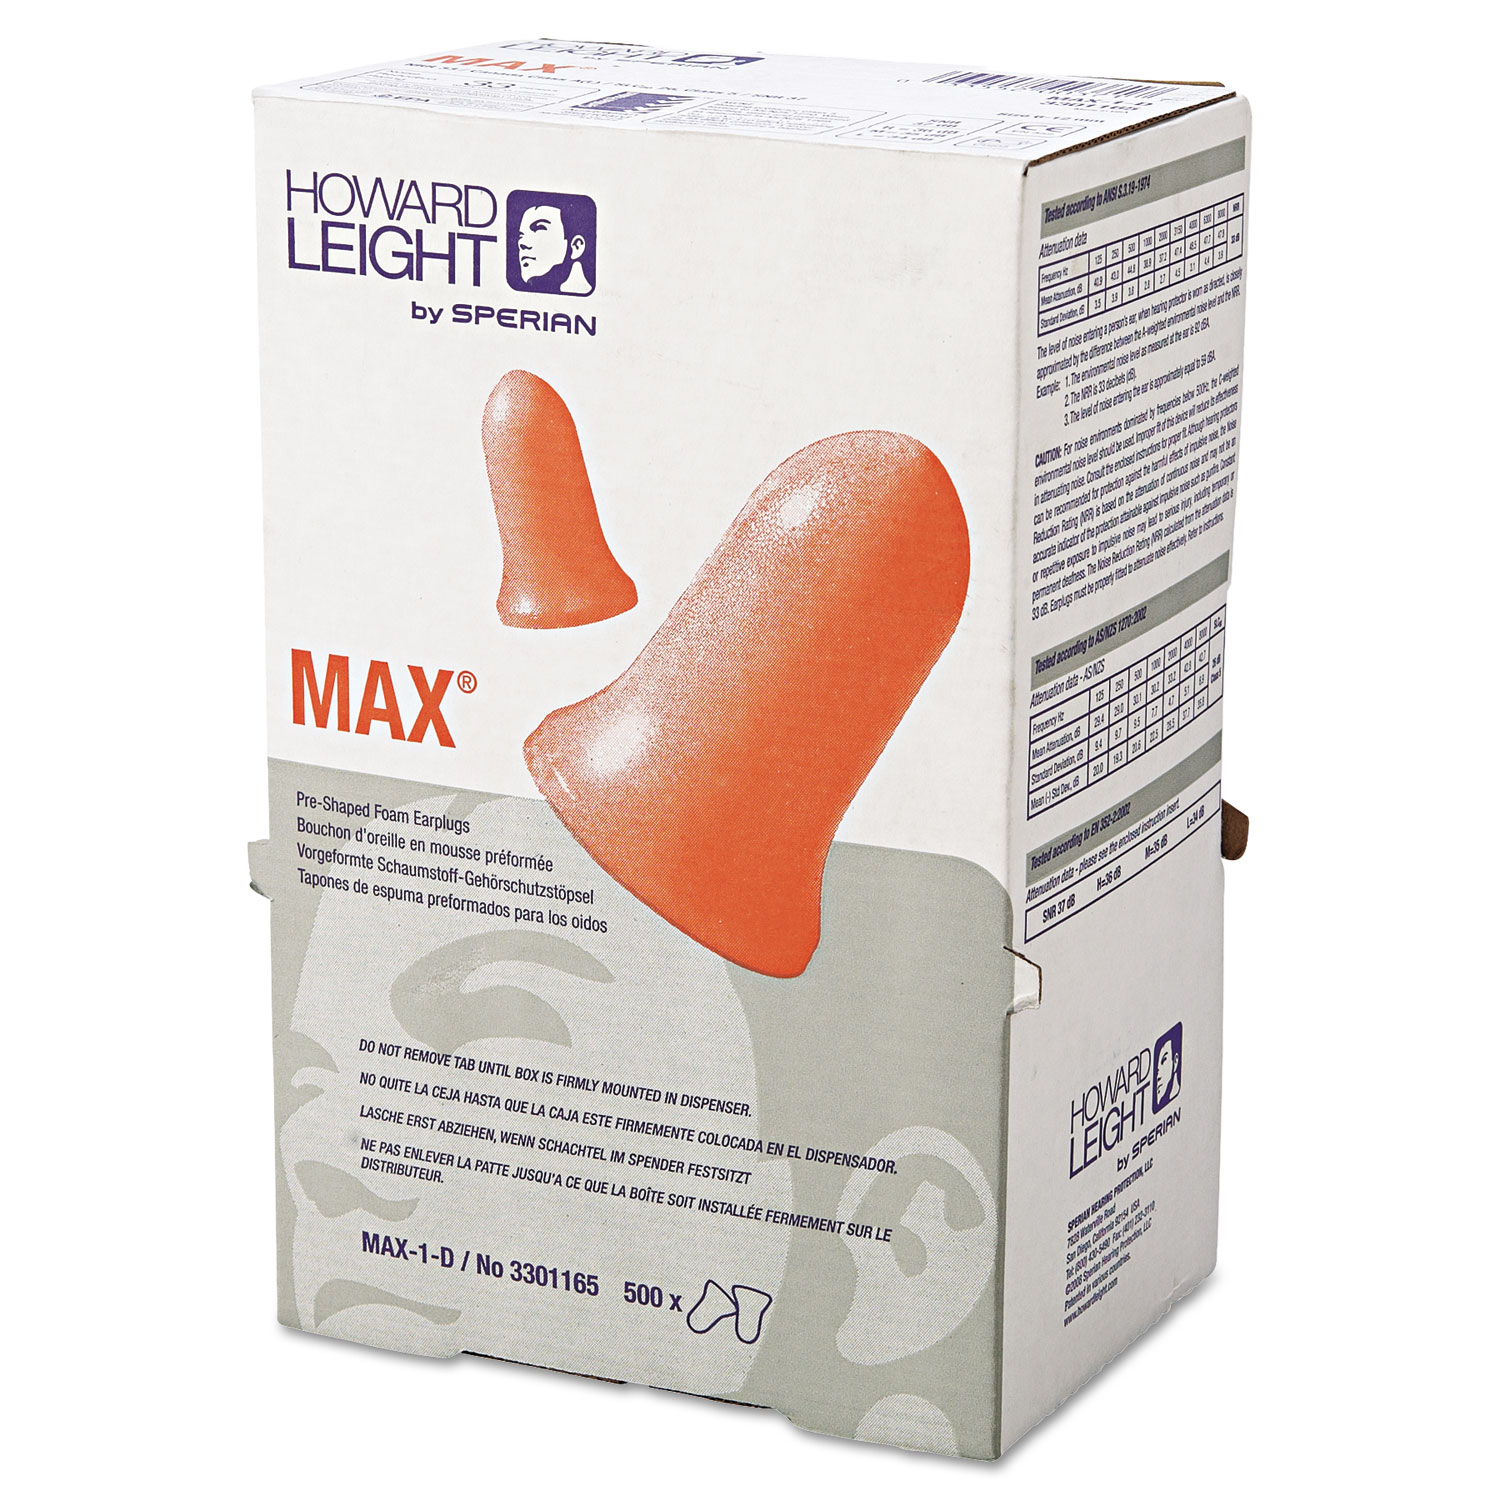  Howard Leight by Honeywell MAX-1-D MAX-1 D Single-Use Earplugs, Cordless, 33NRR, Coral, LS 500 Refill (HOWMAX1D) 